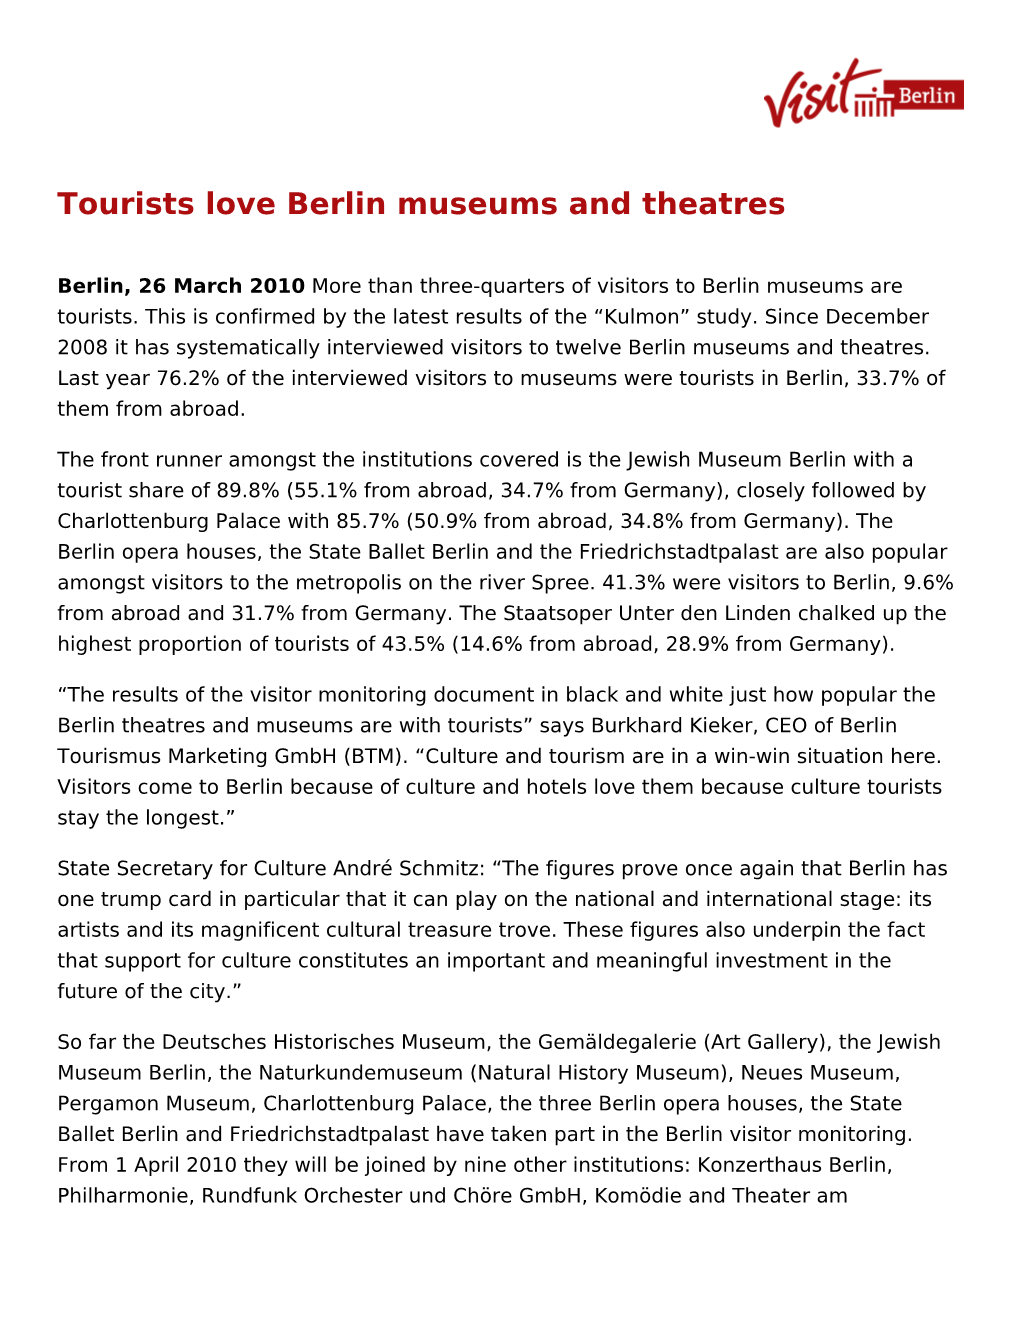 Tourists Love Berlin Museums and Theatres